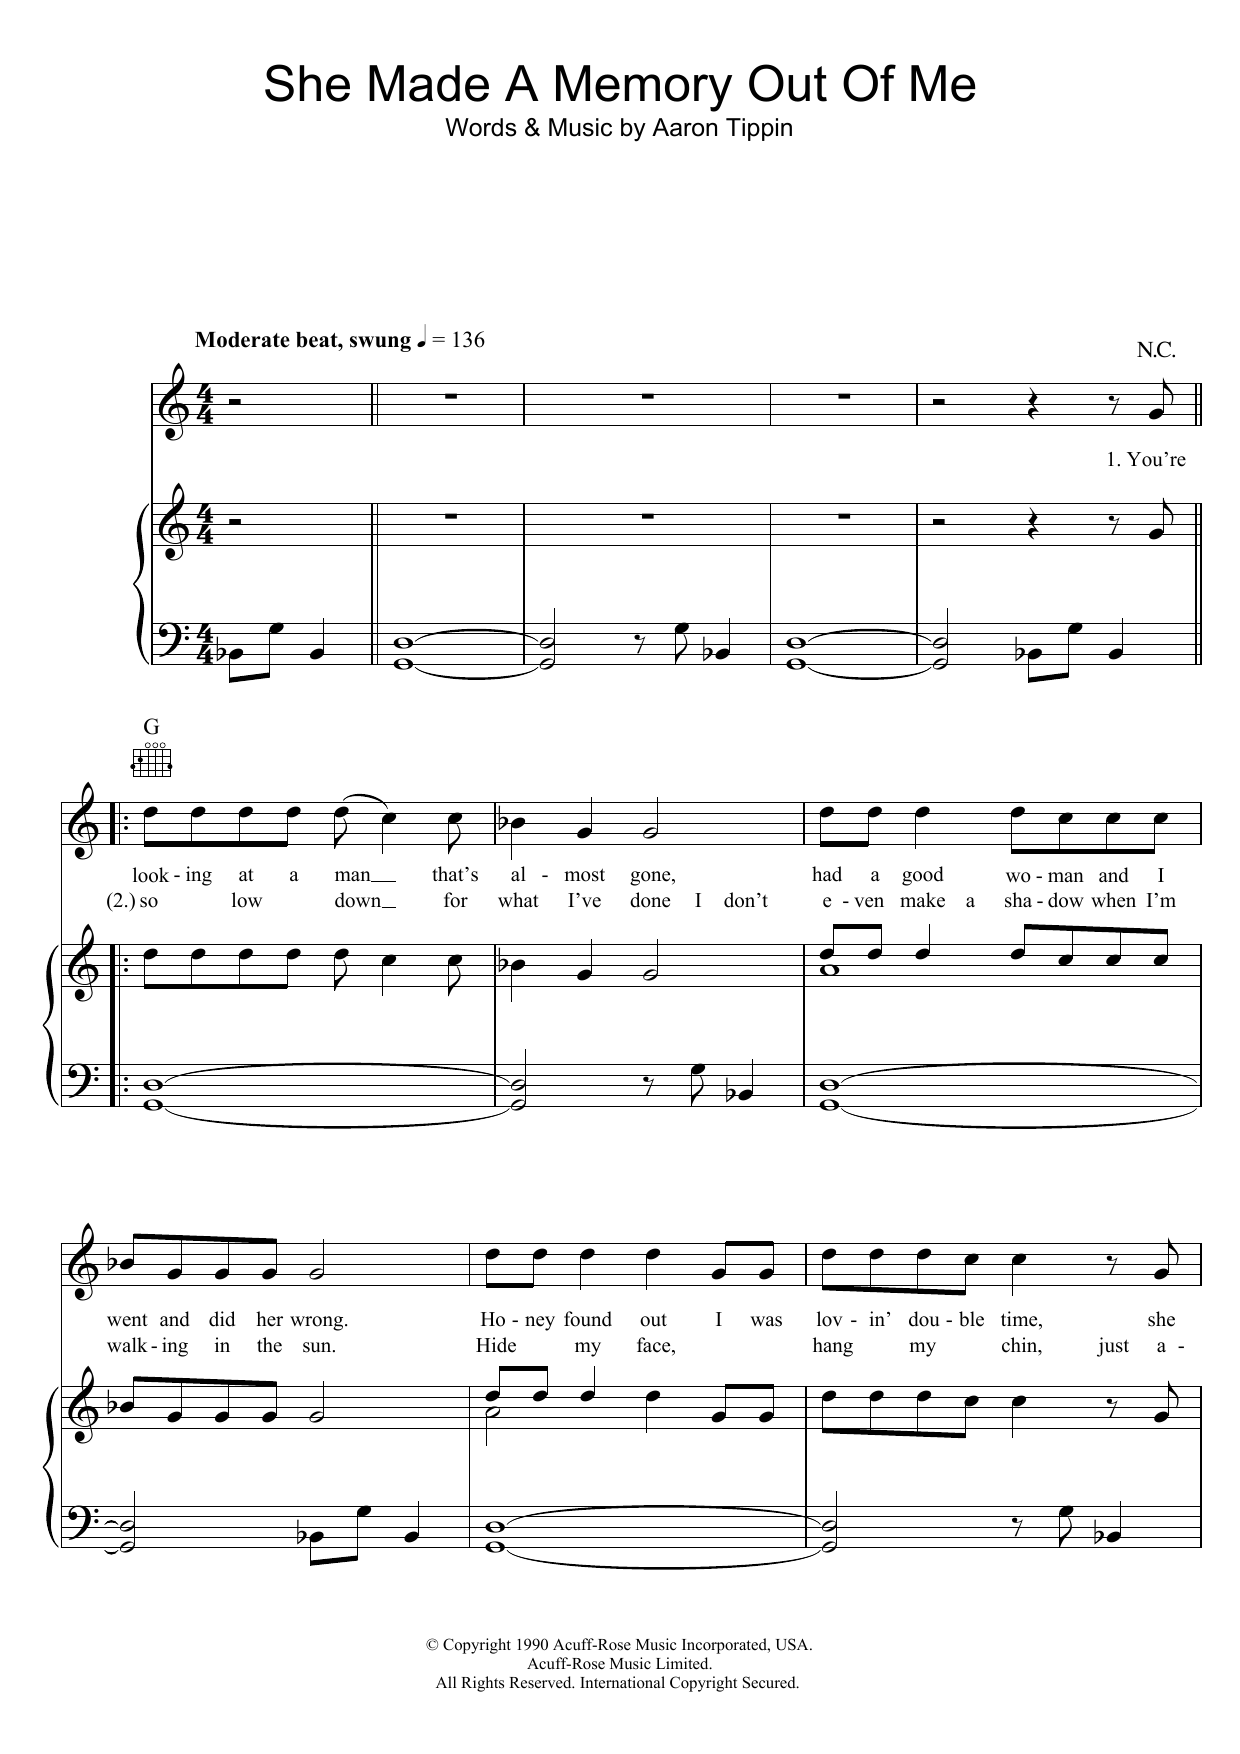 Download Aaron Tippin She Made A Memory Out Of Me Sheet Music